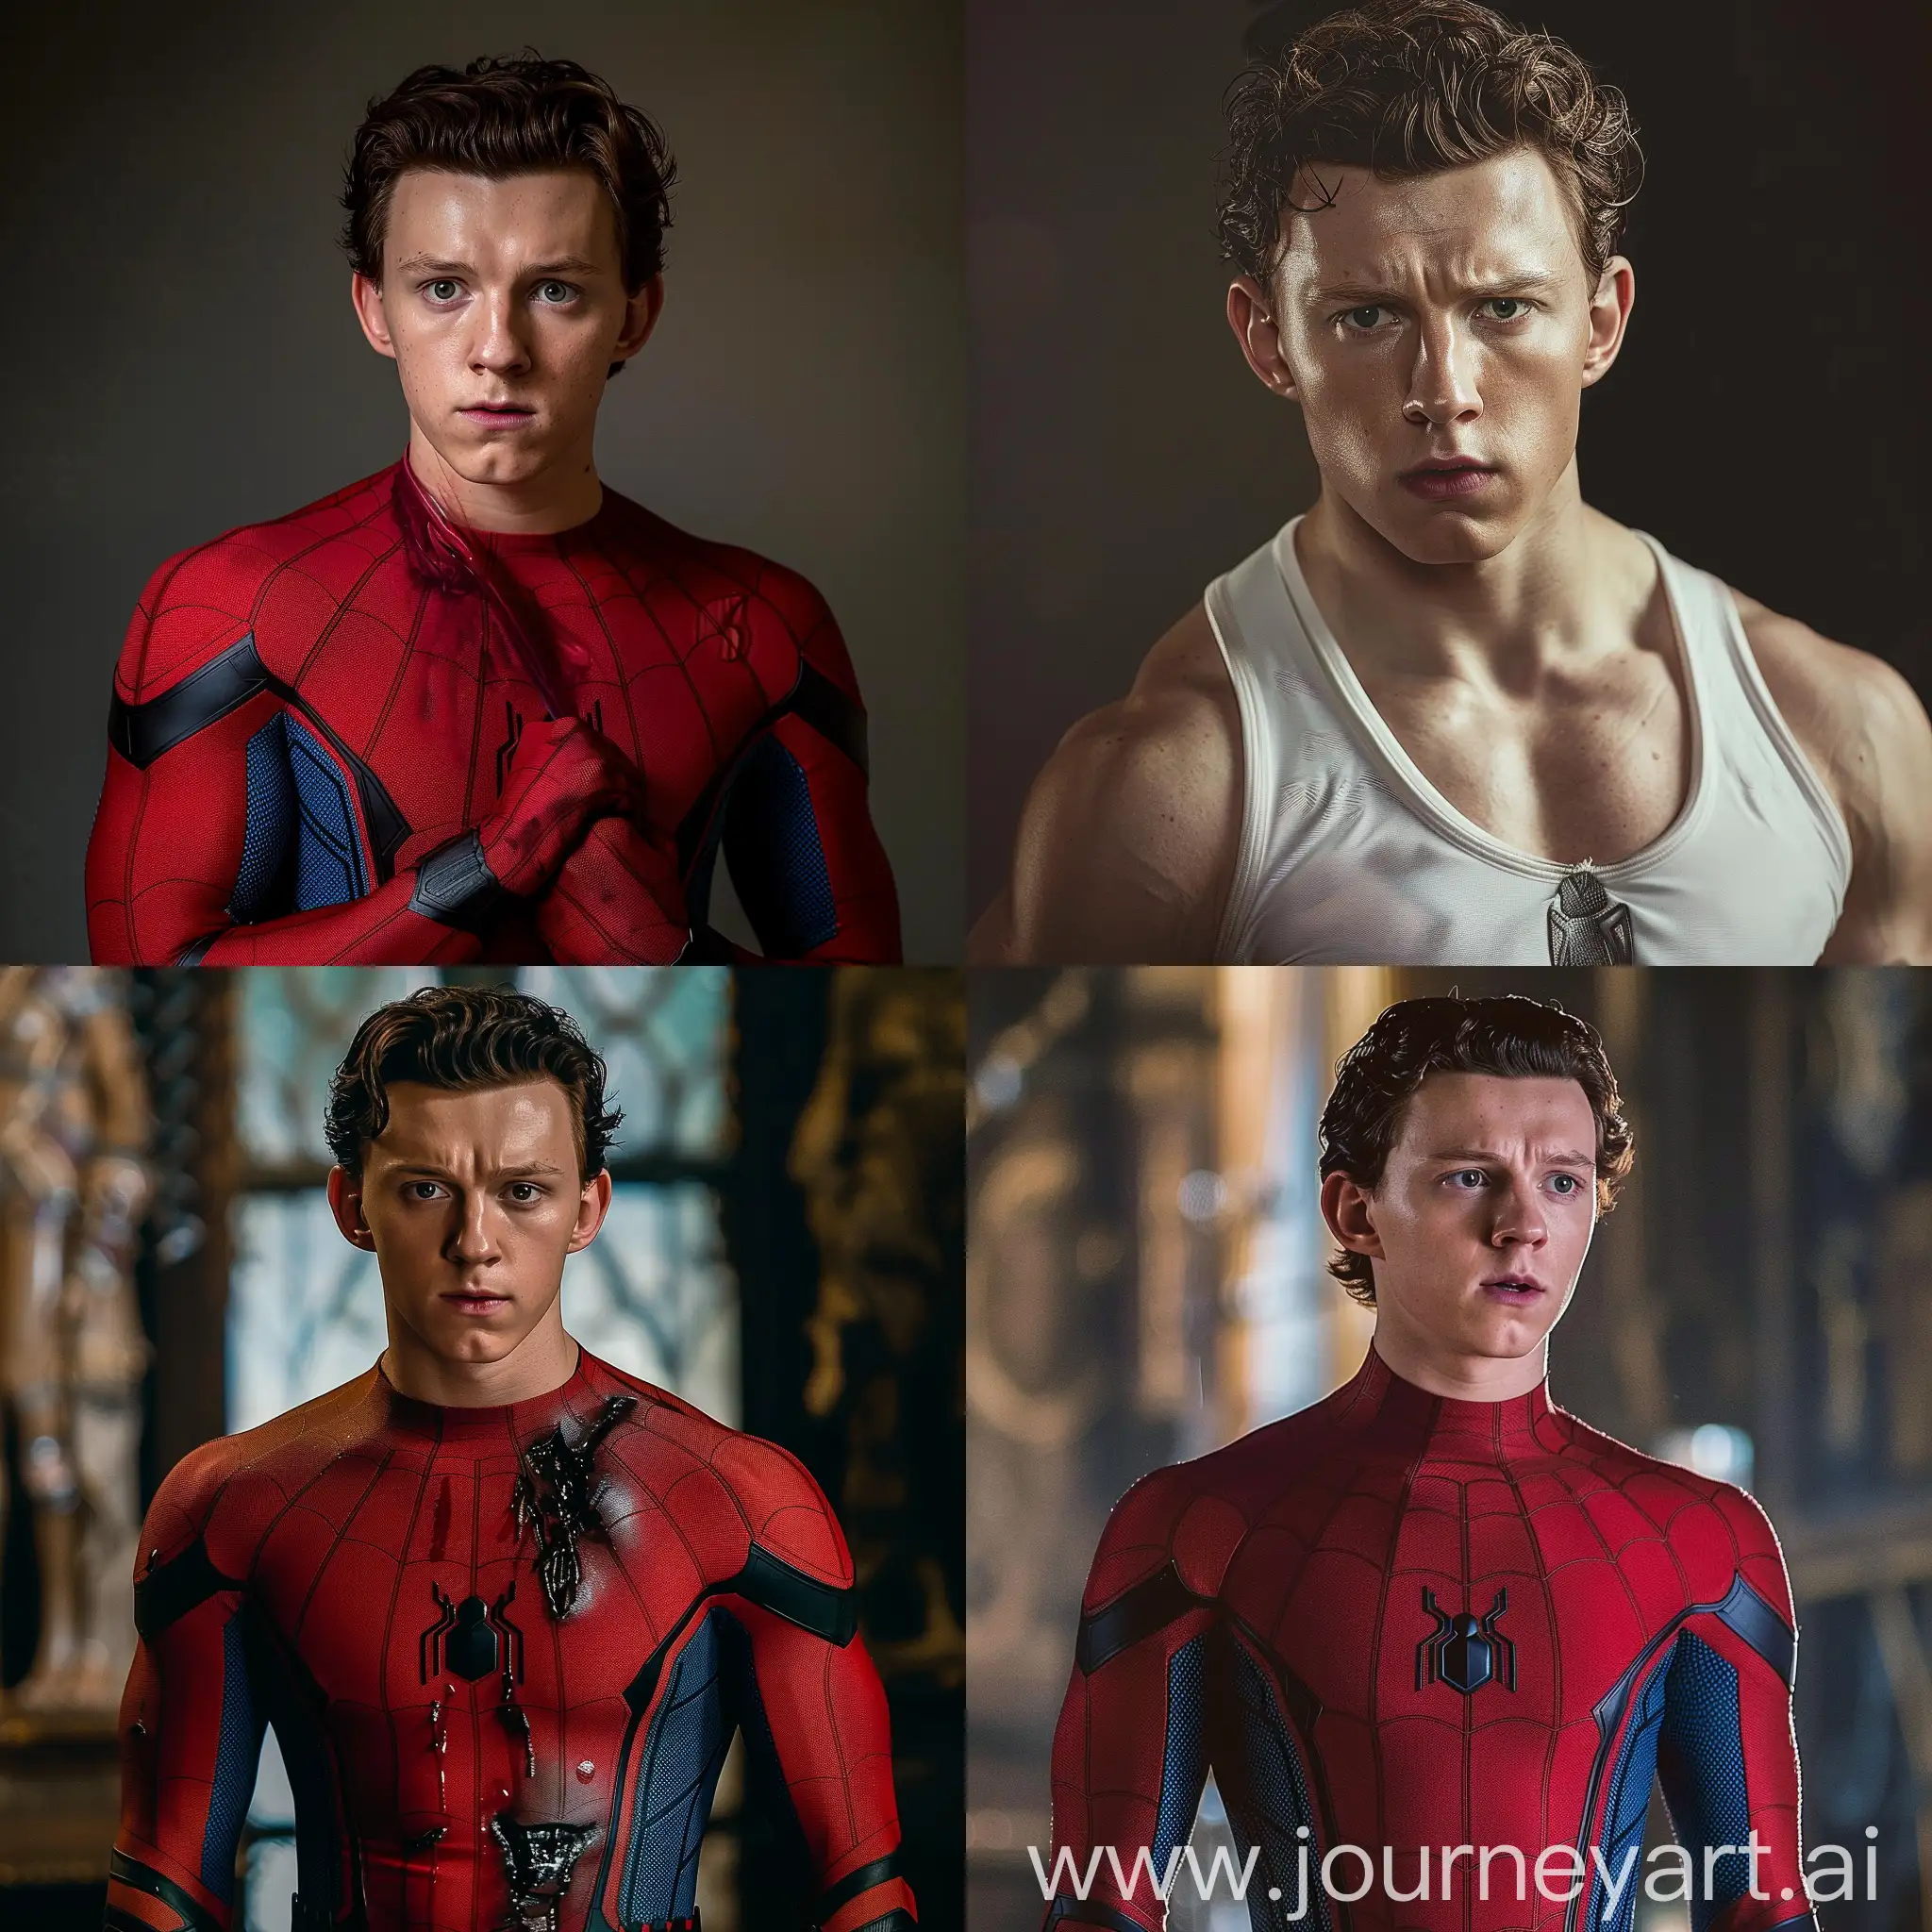 Tom-Holland-Poses-Shirtless-for-Press-Interview